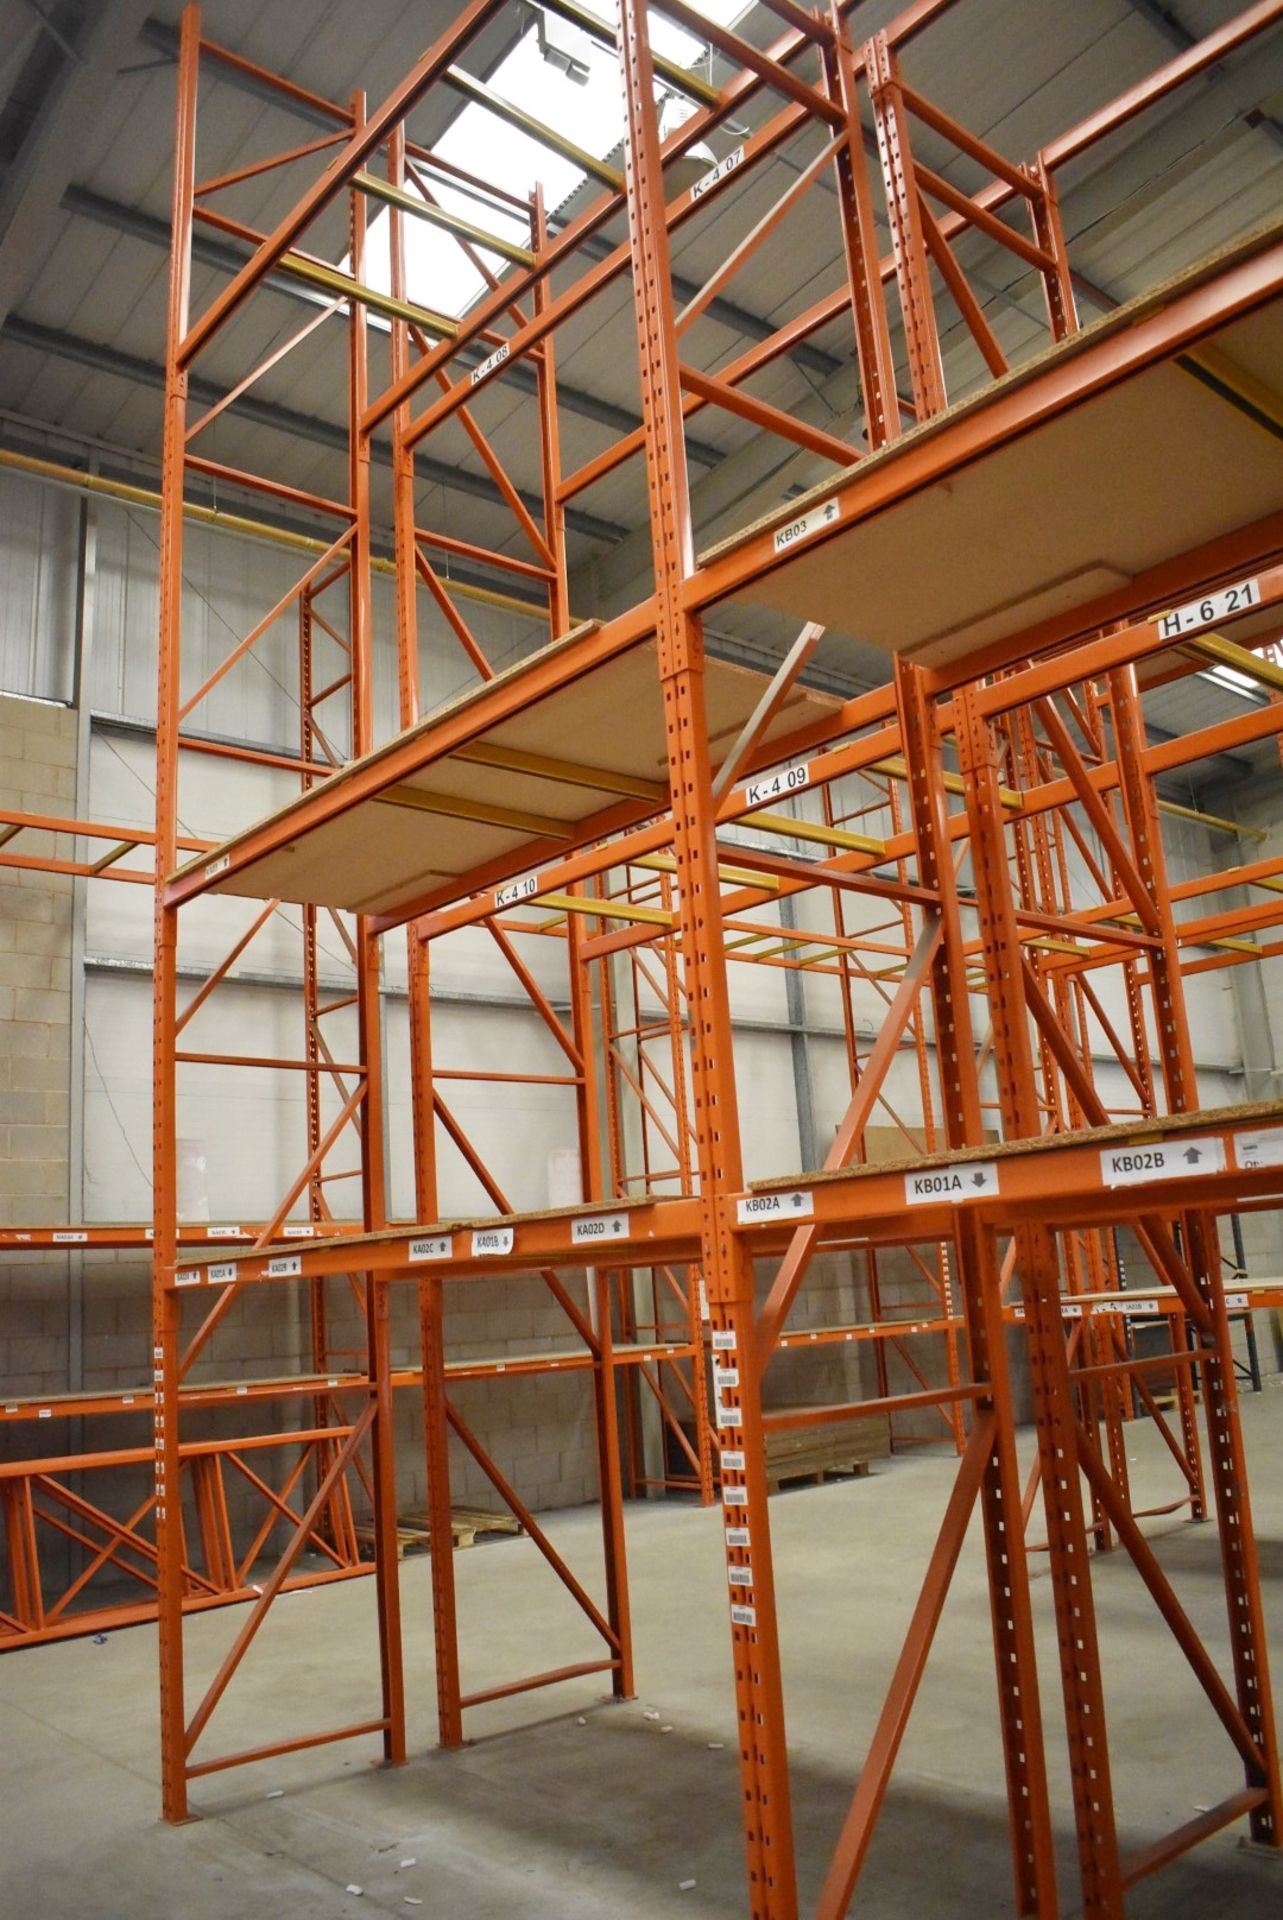 5 x Bays of RediRack Warehouse Pallet Racking - Lot Includes 6 x Uprights and 30 x Crossbeams - - Image 5 of 5